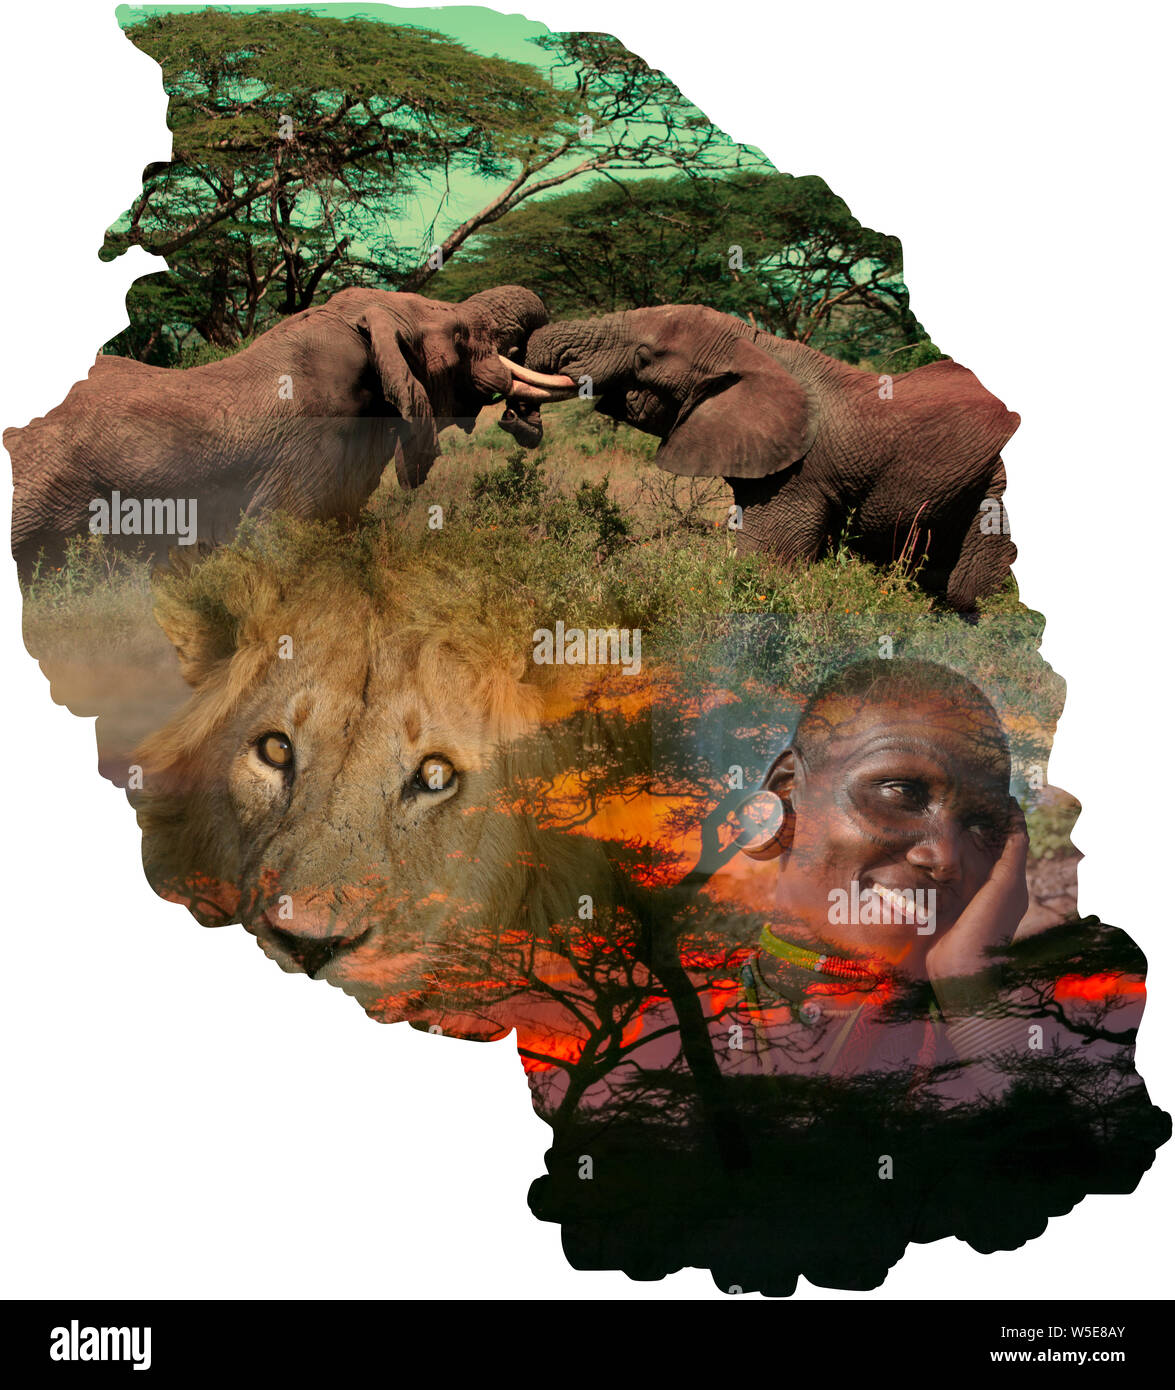 Digitally enhanced image of a Map of Tanzania collage with local images of wildlife and people Stock Photo